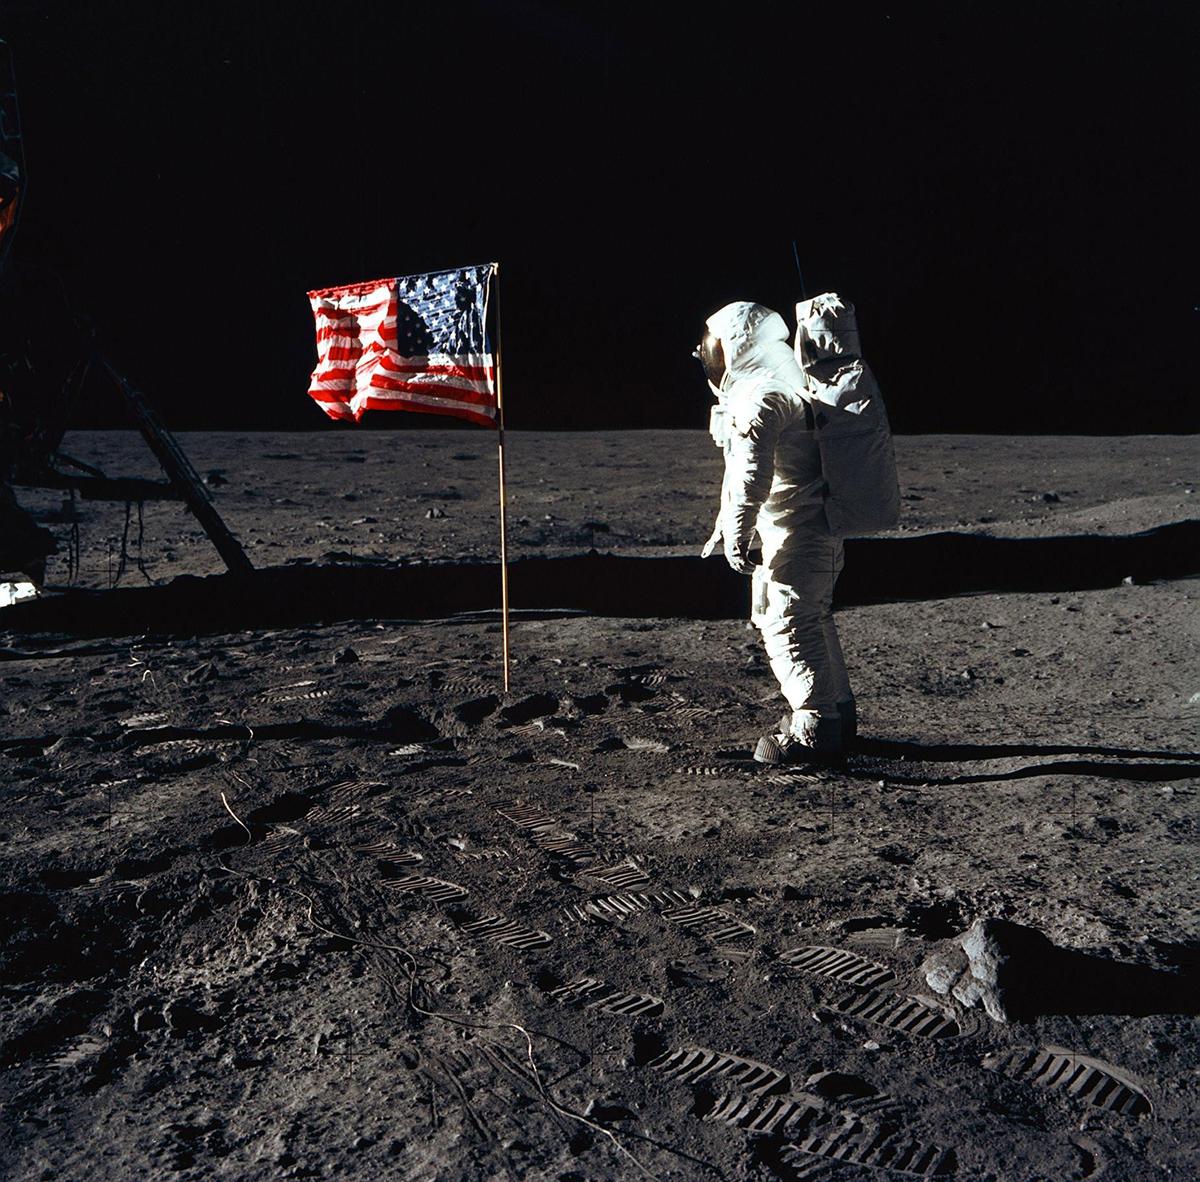 Edwin "Buzz" Aldrin poses for a photograph beside the United States flag on the lunar surface. (NASA)